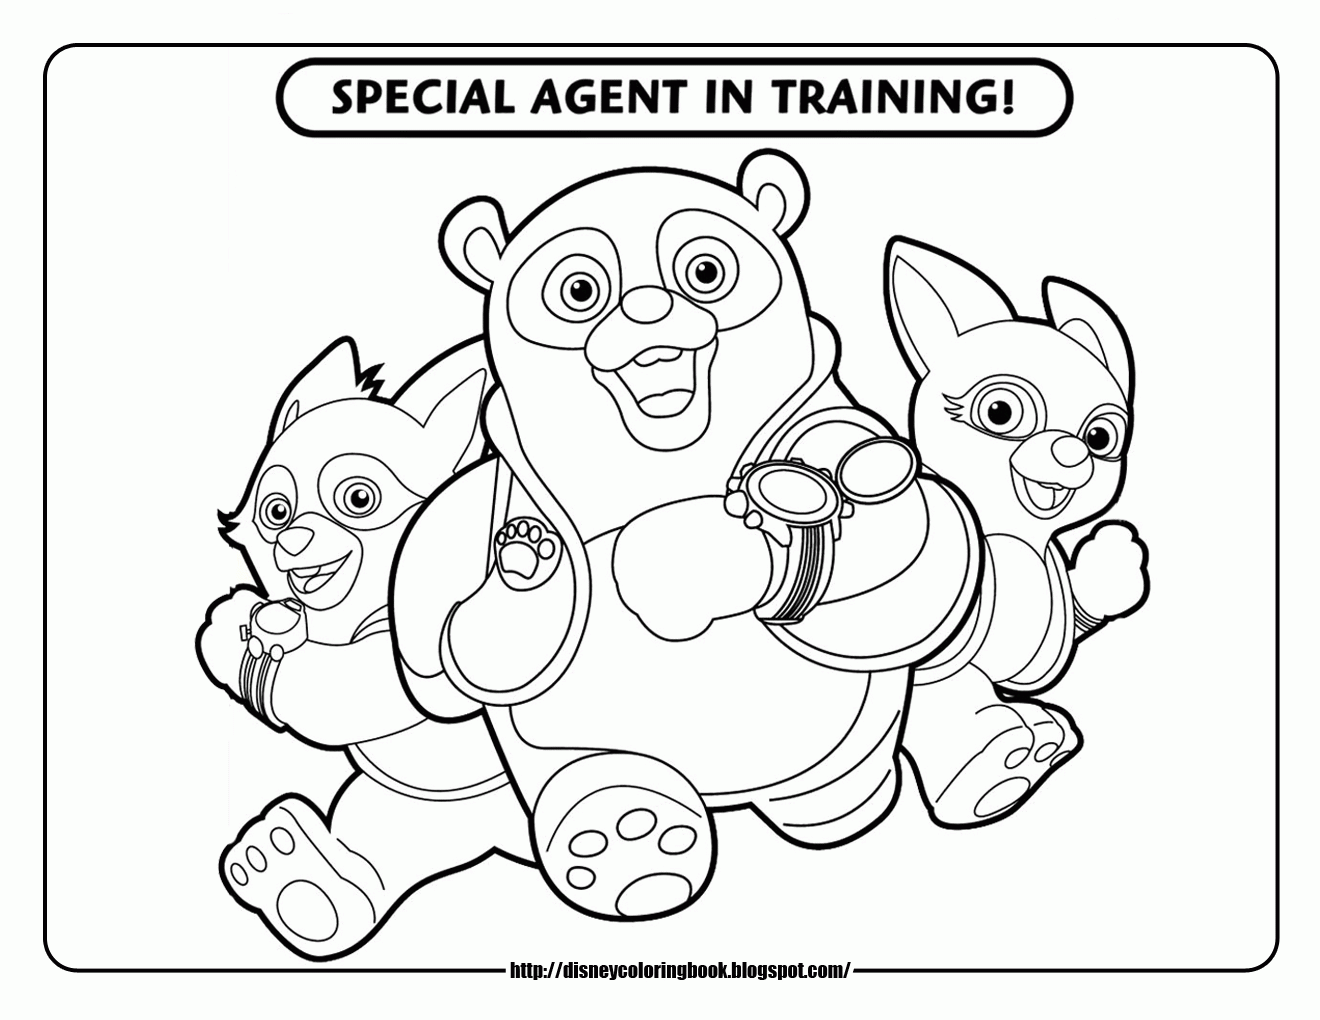 Disney Character Coloring Pages To Print